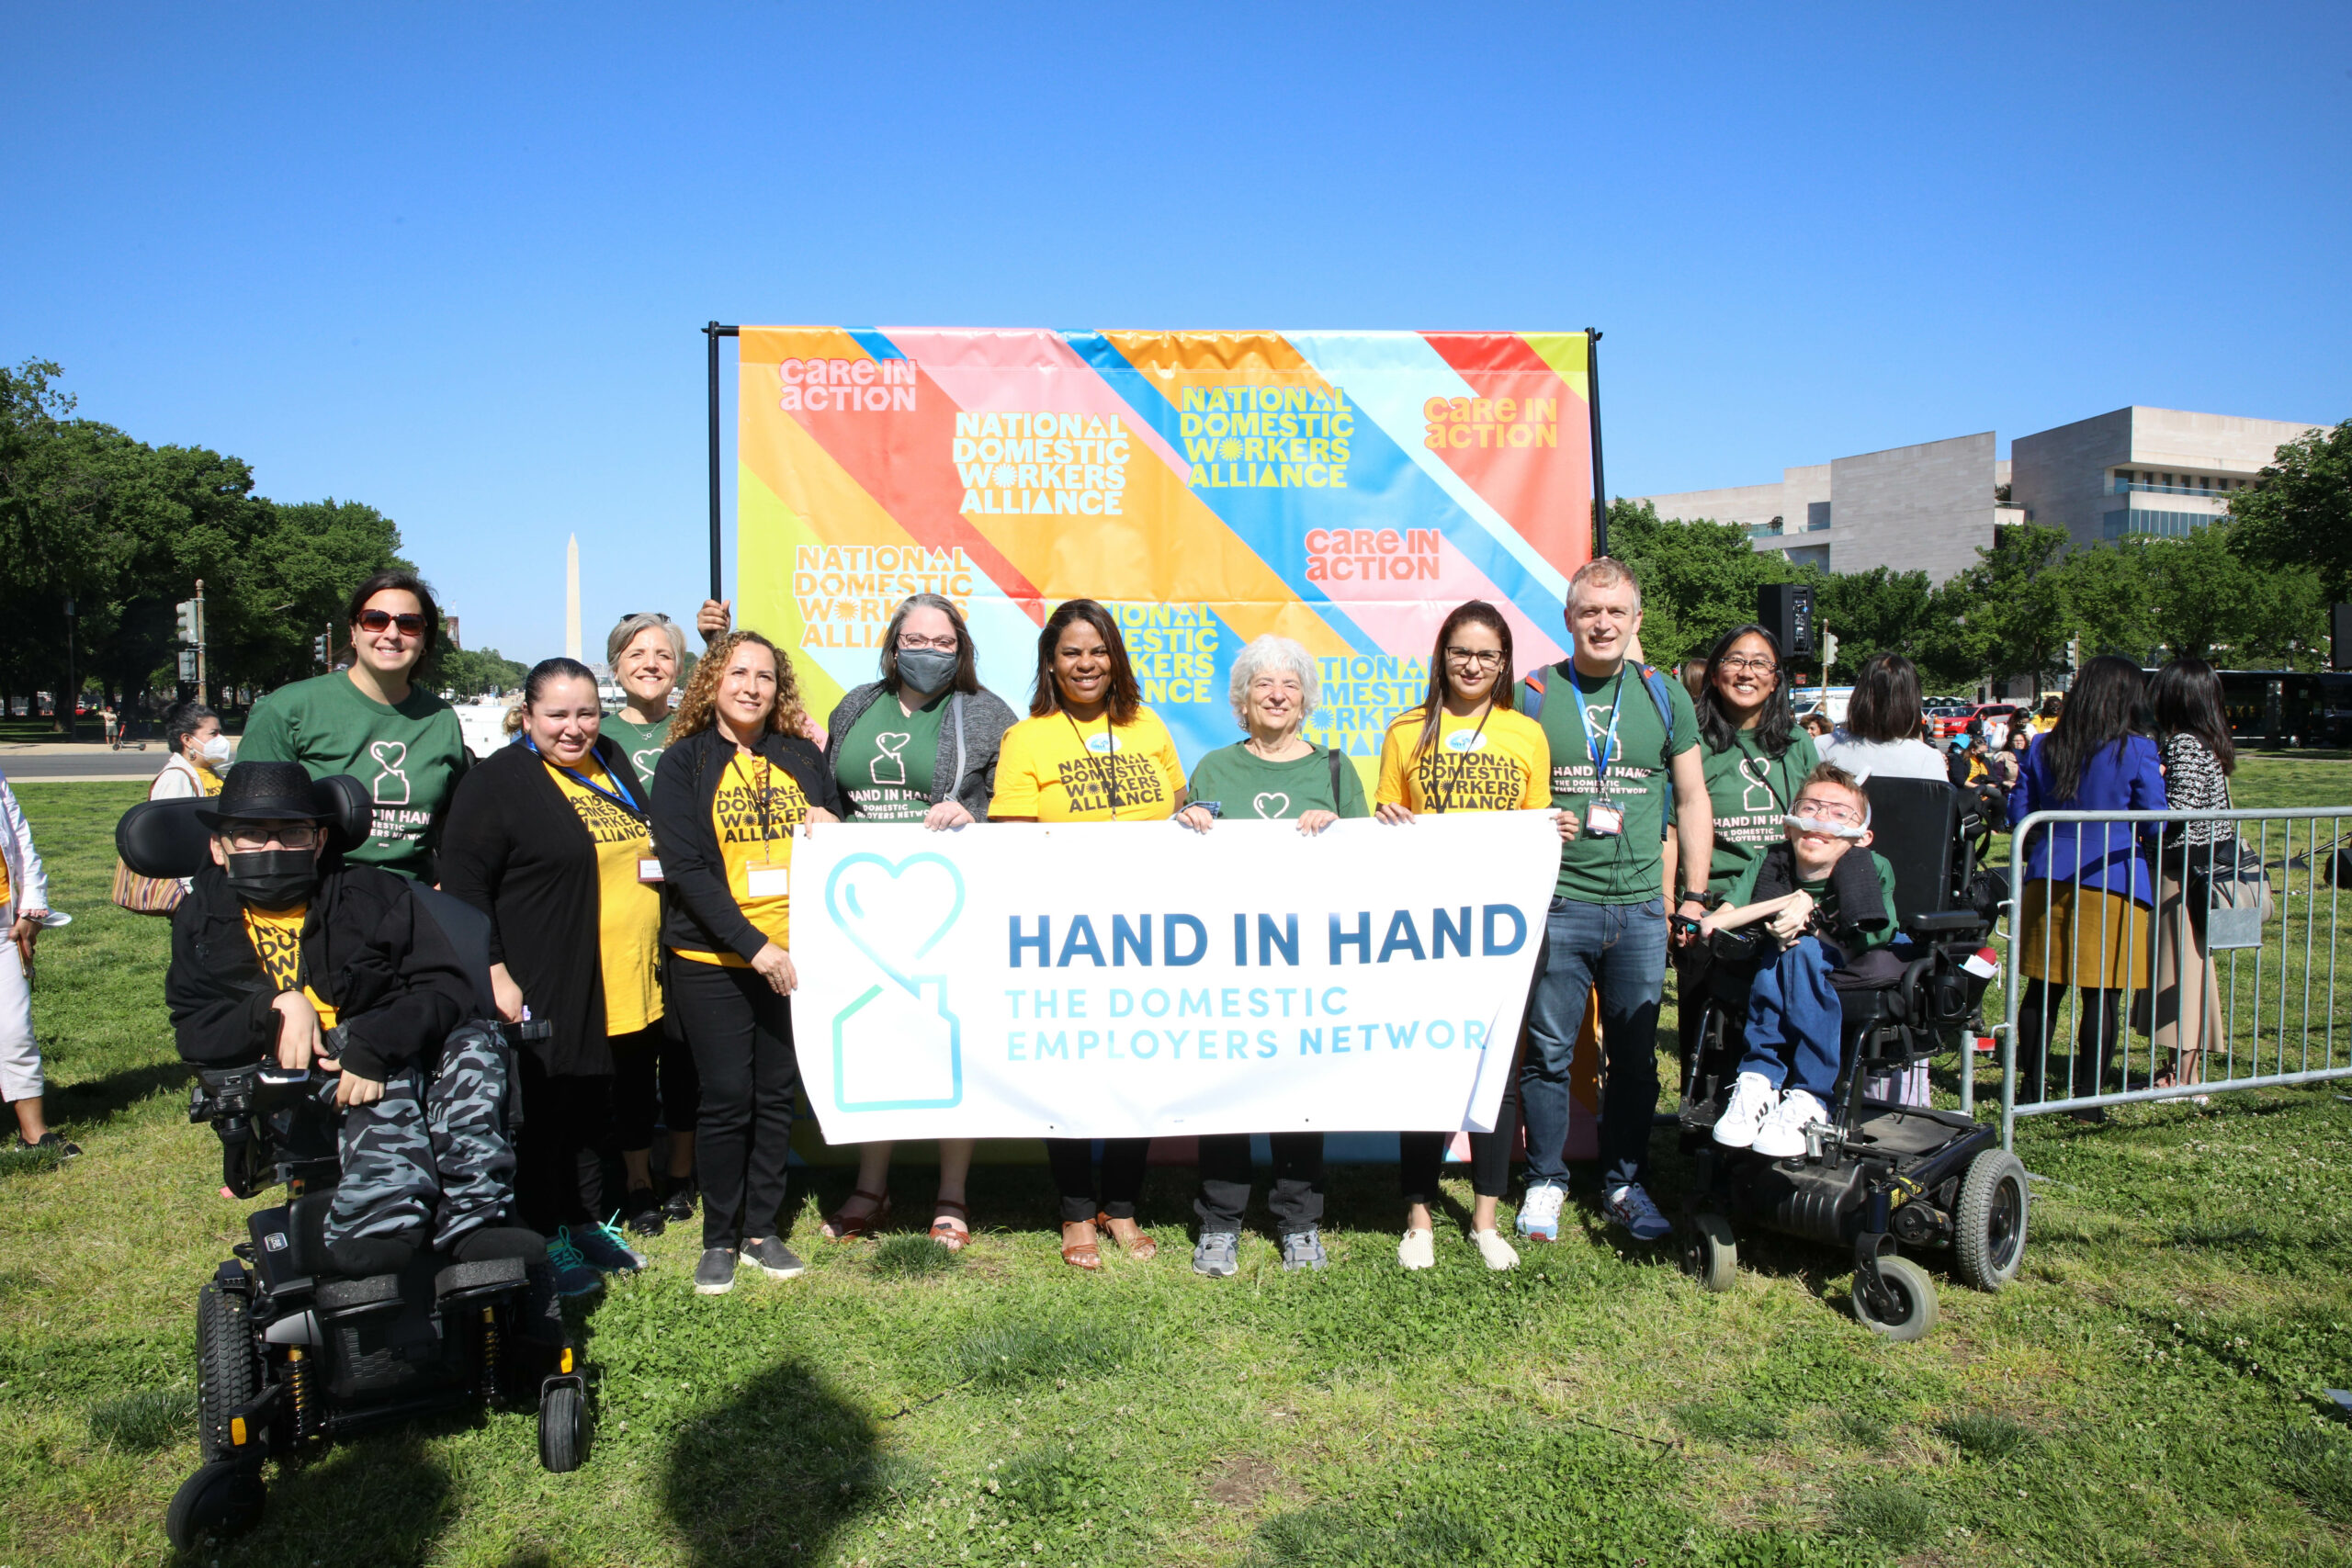 Group of people standing and sitting in wheelchairs while holding Hand in Hand banner, outside.